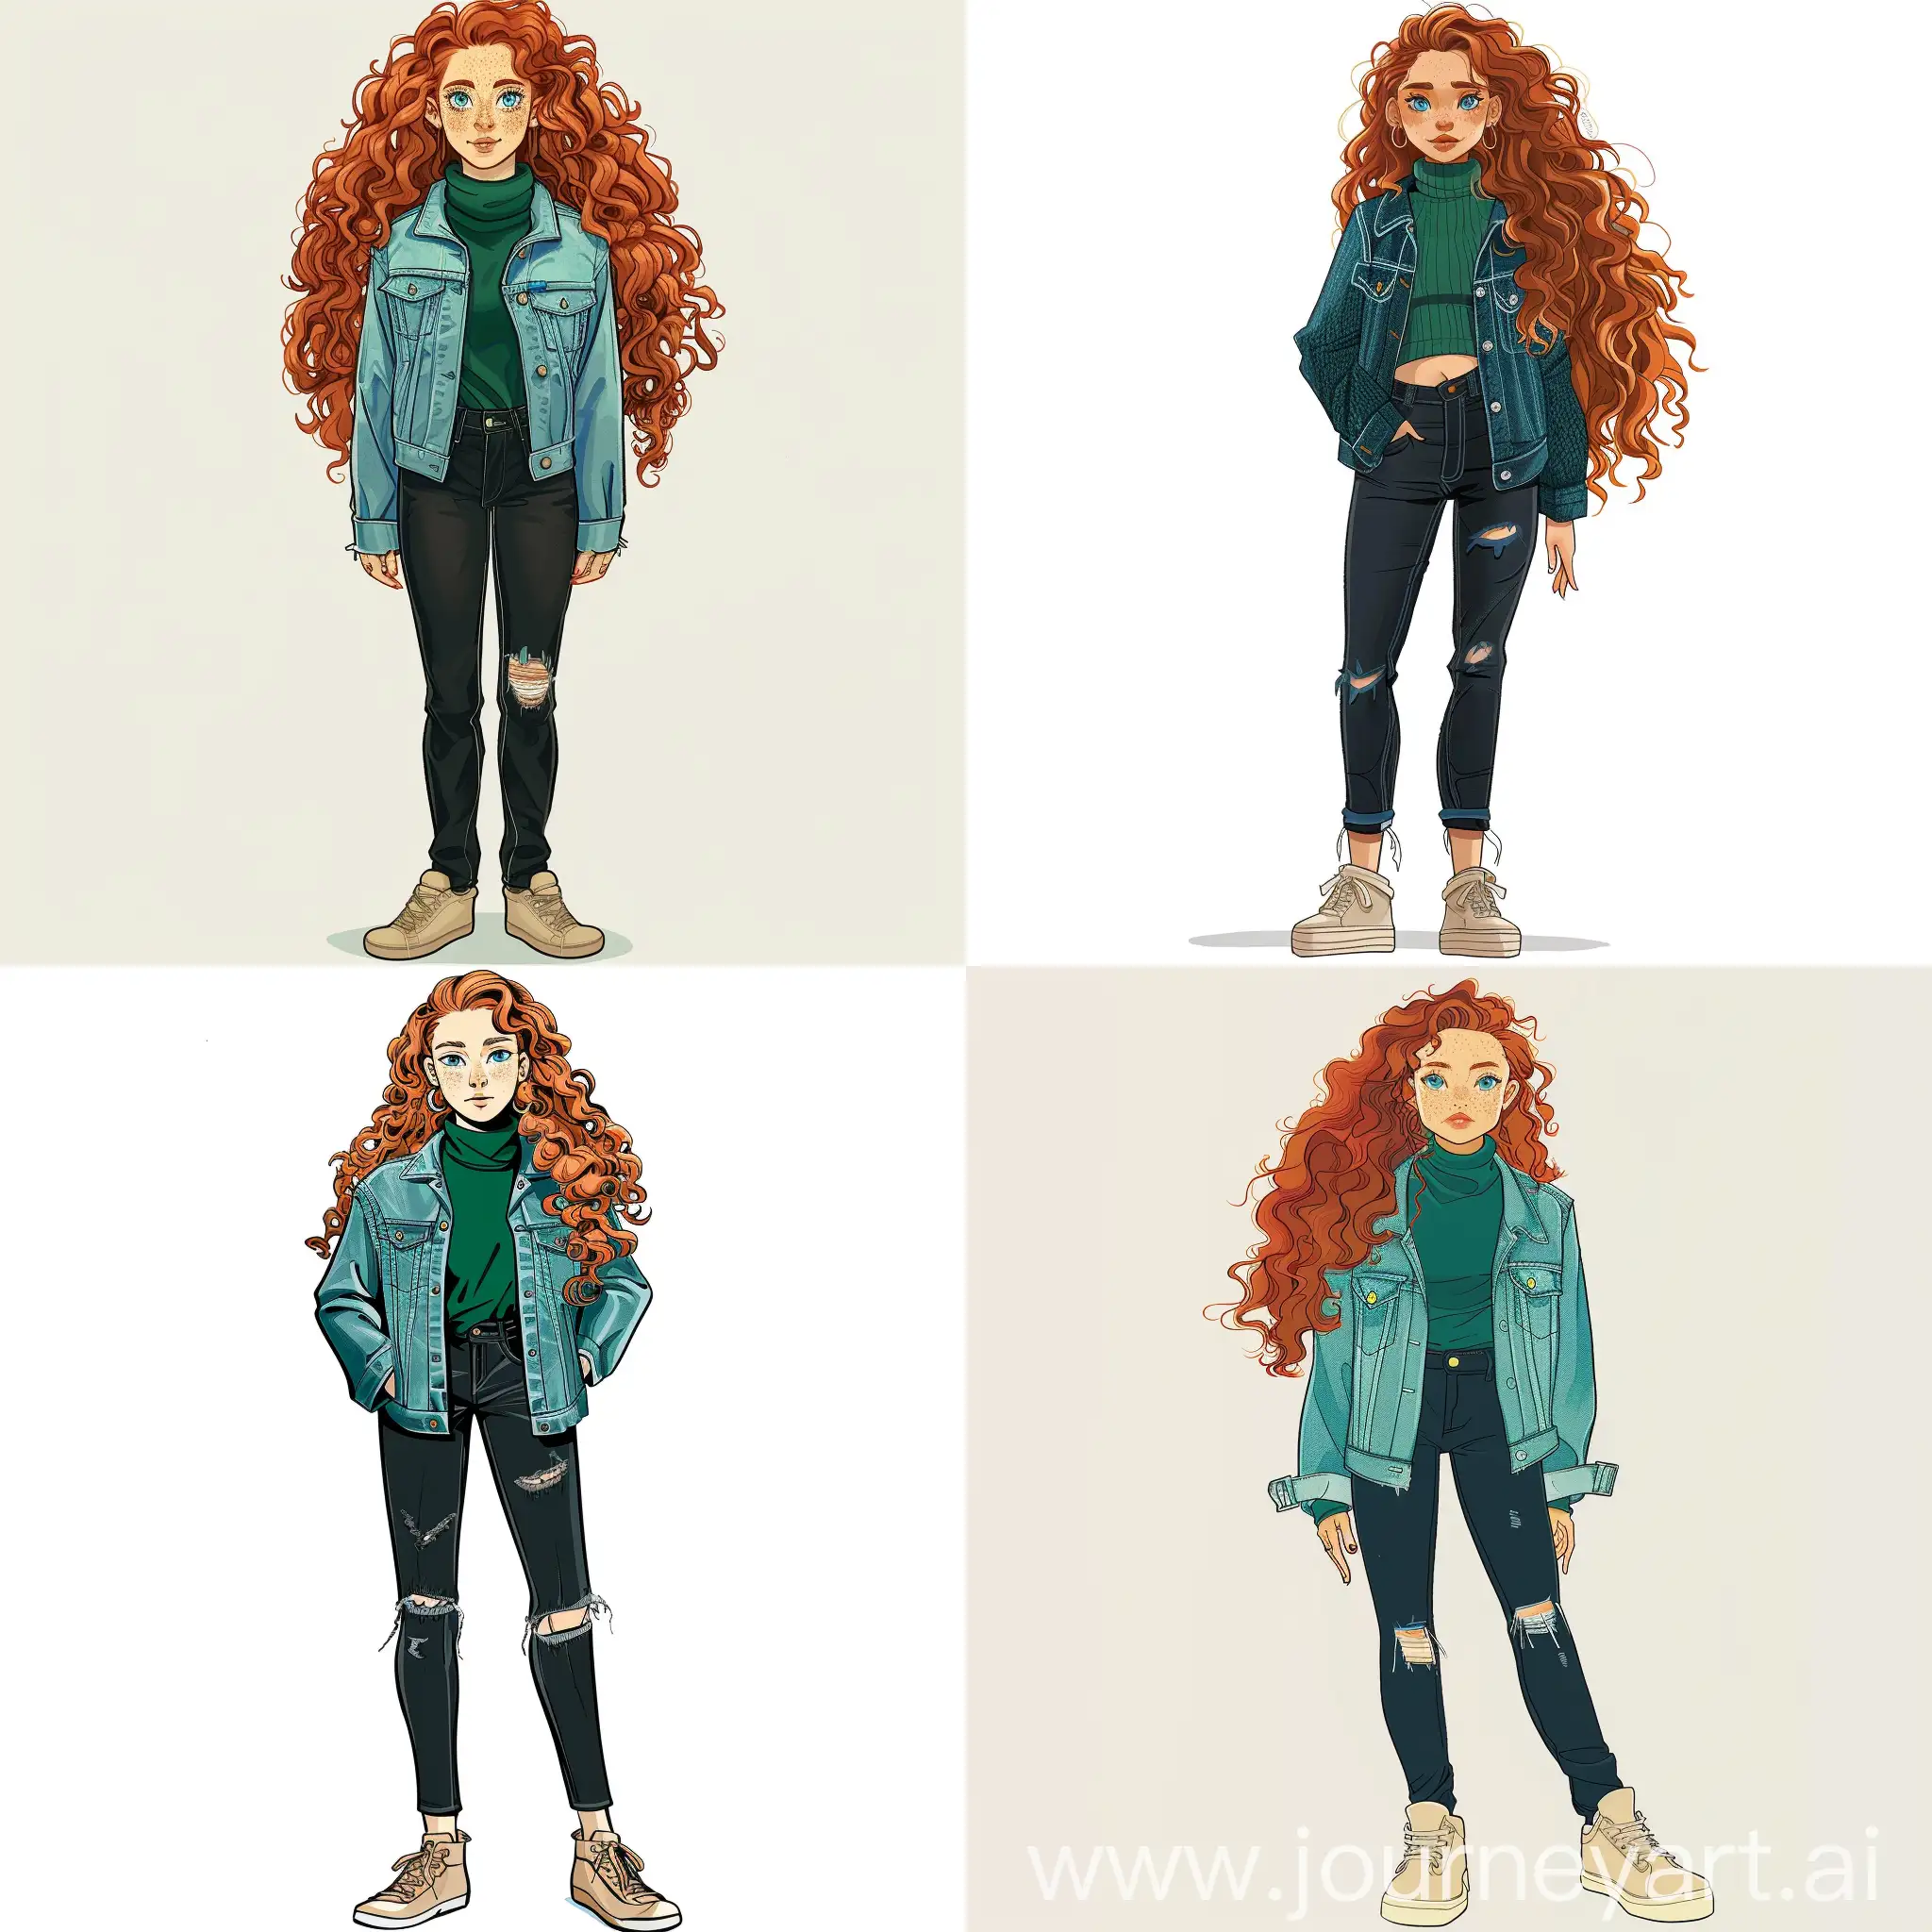 woman, full height, long curly copper hair, blue eyes, aquiline nose, small lips, large forehead, close-set eyes, small breasts, emerald turtleneck sweater, denim jacket, black jeans, beige sneakers, no accessories, anime
